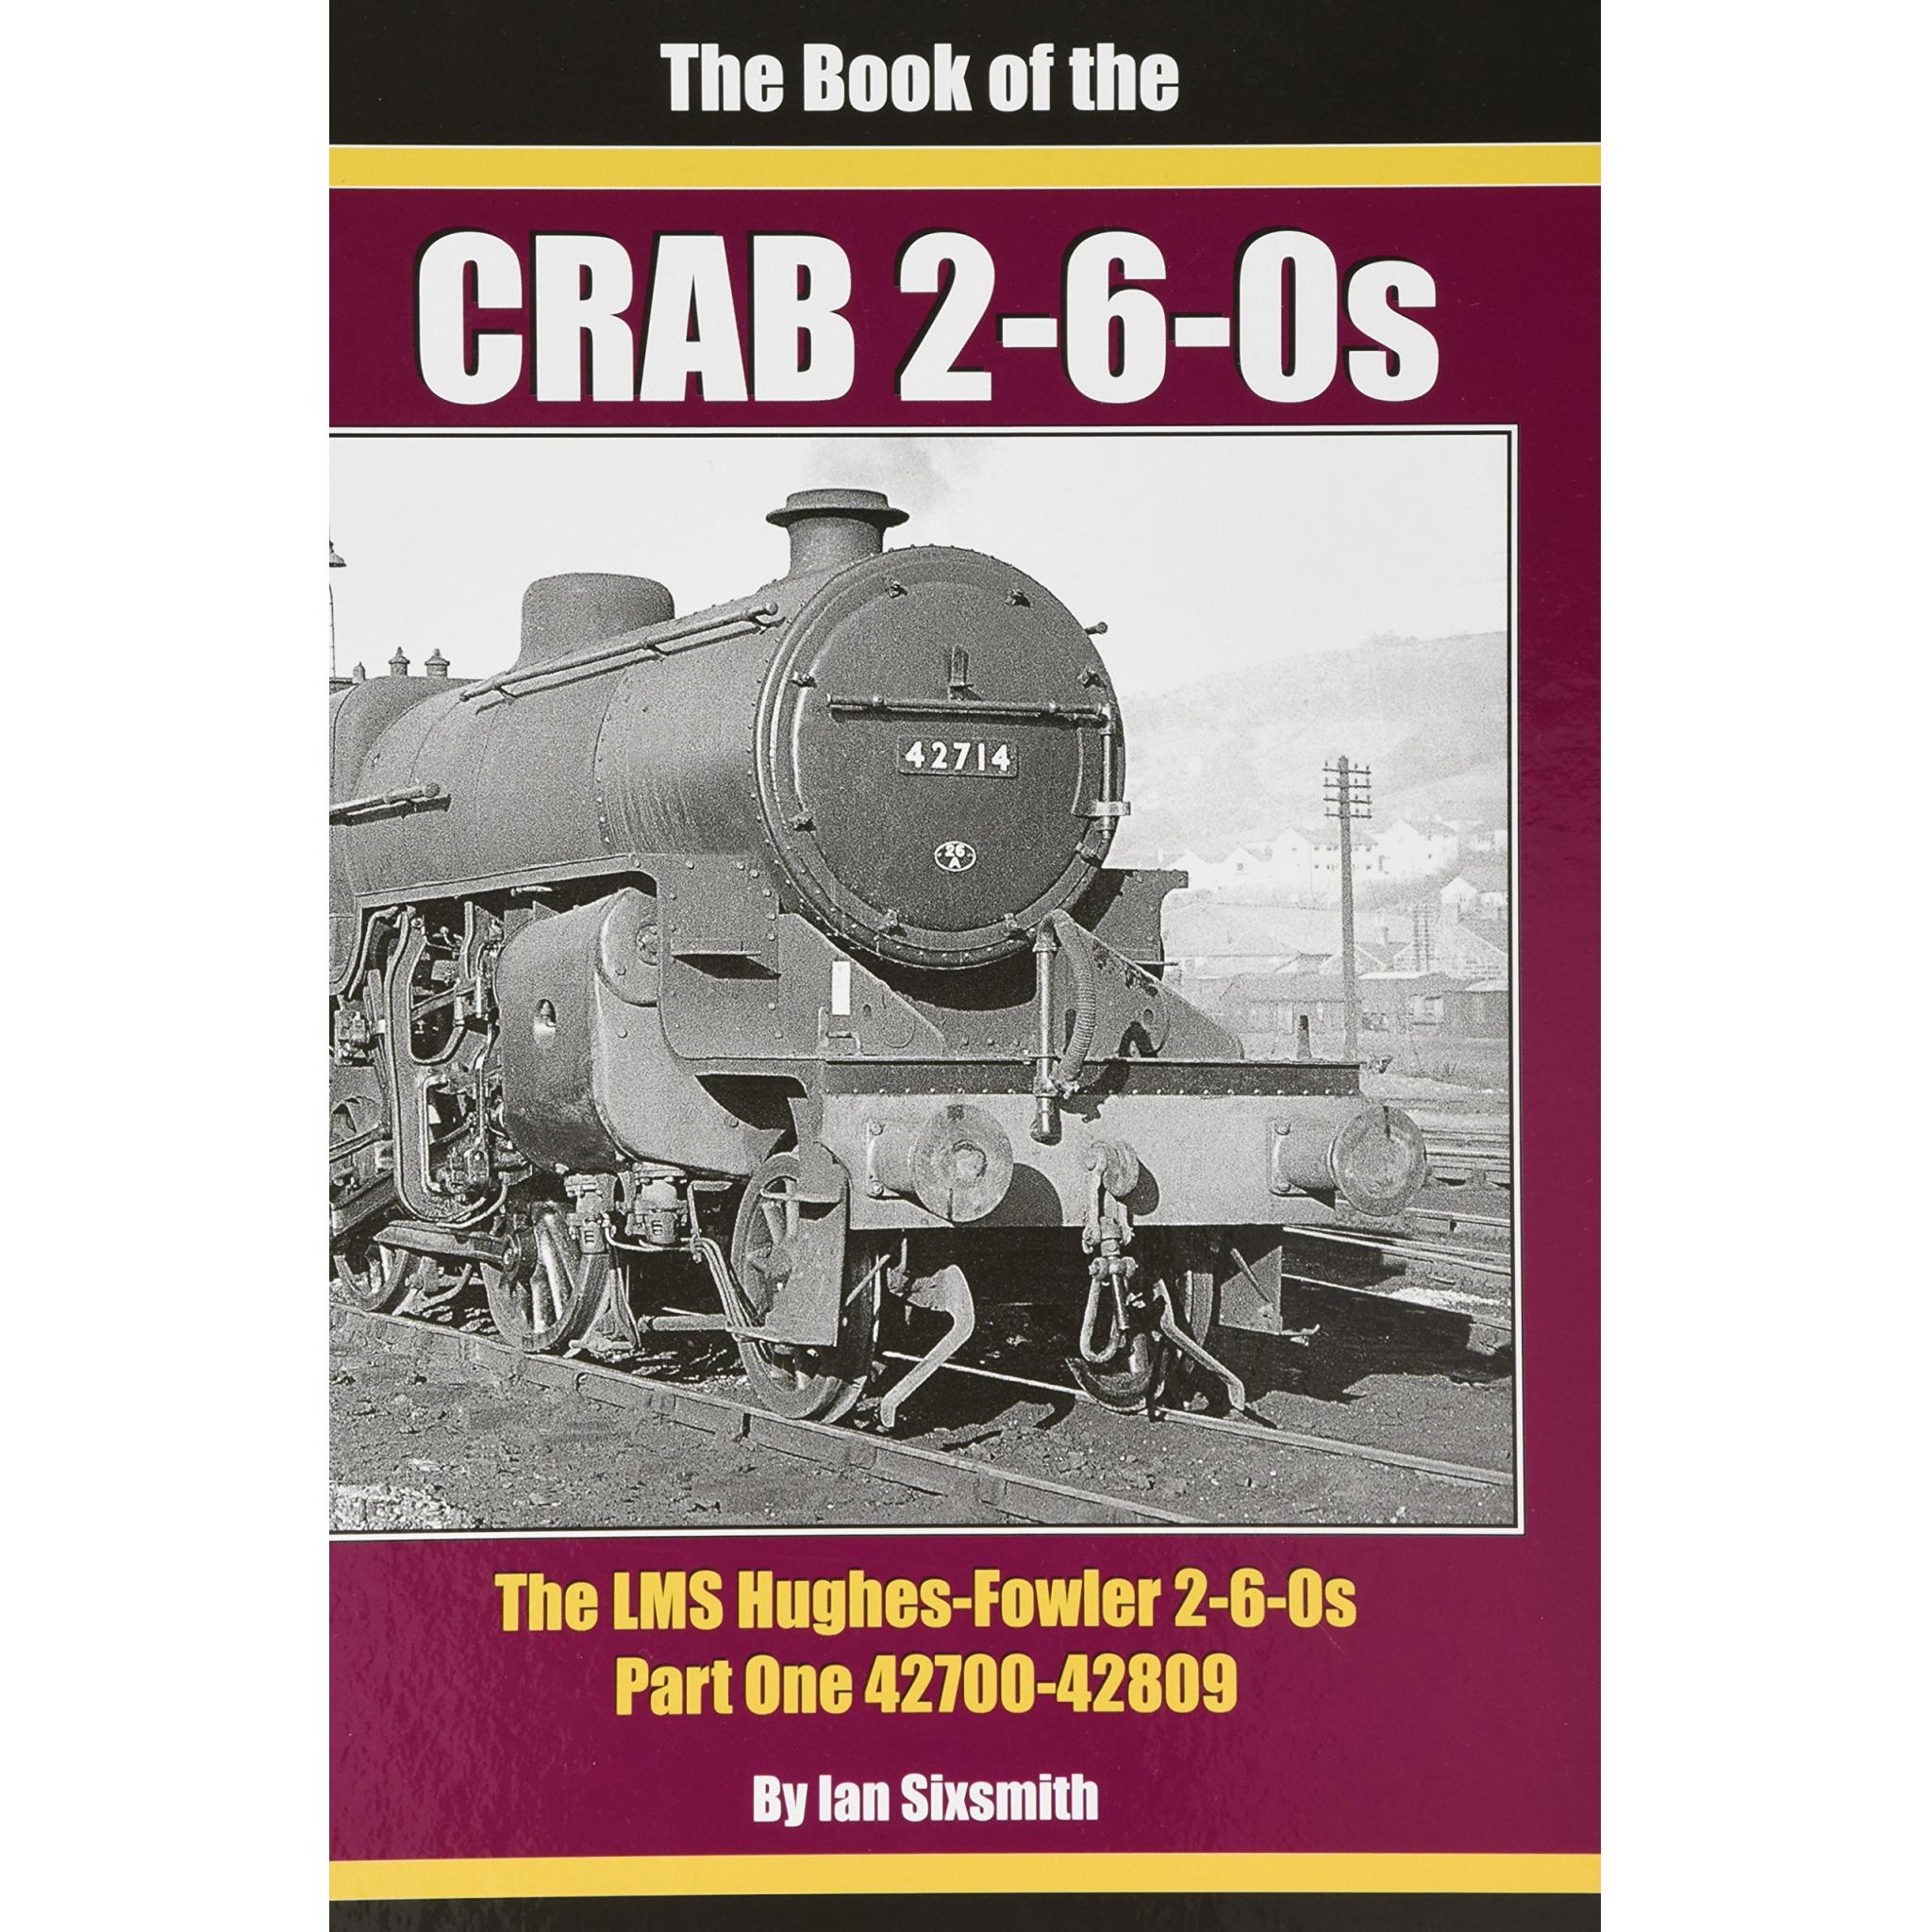 The Book of the CRAB 2-6-0s The LMS Hughes-Fowler 2-6-0s Part One 42700-42809